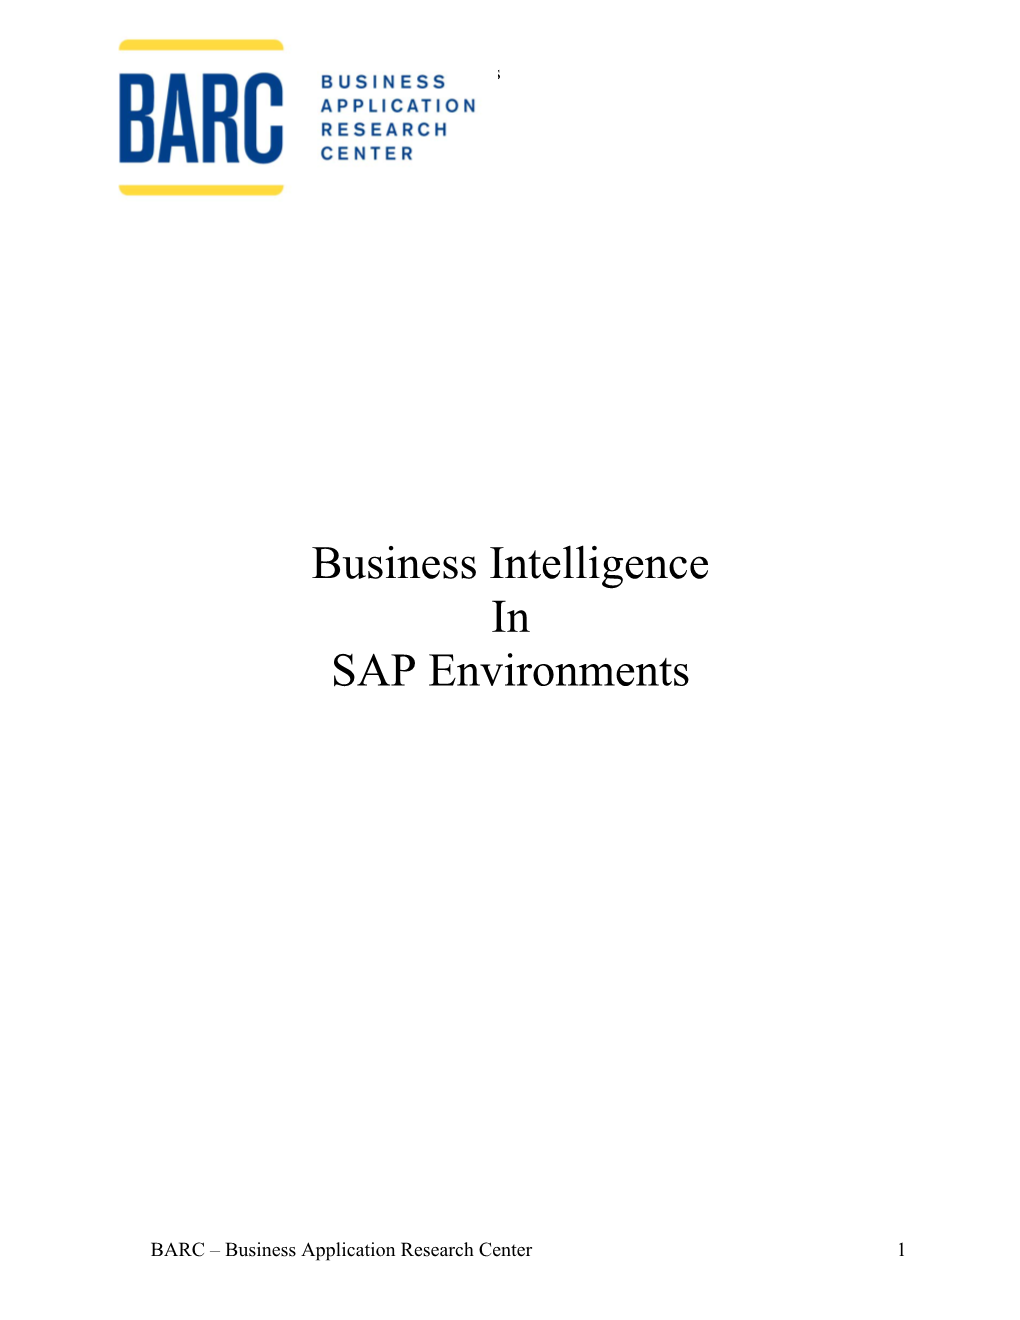 Business Intelligence in SAP Environments